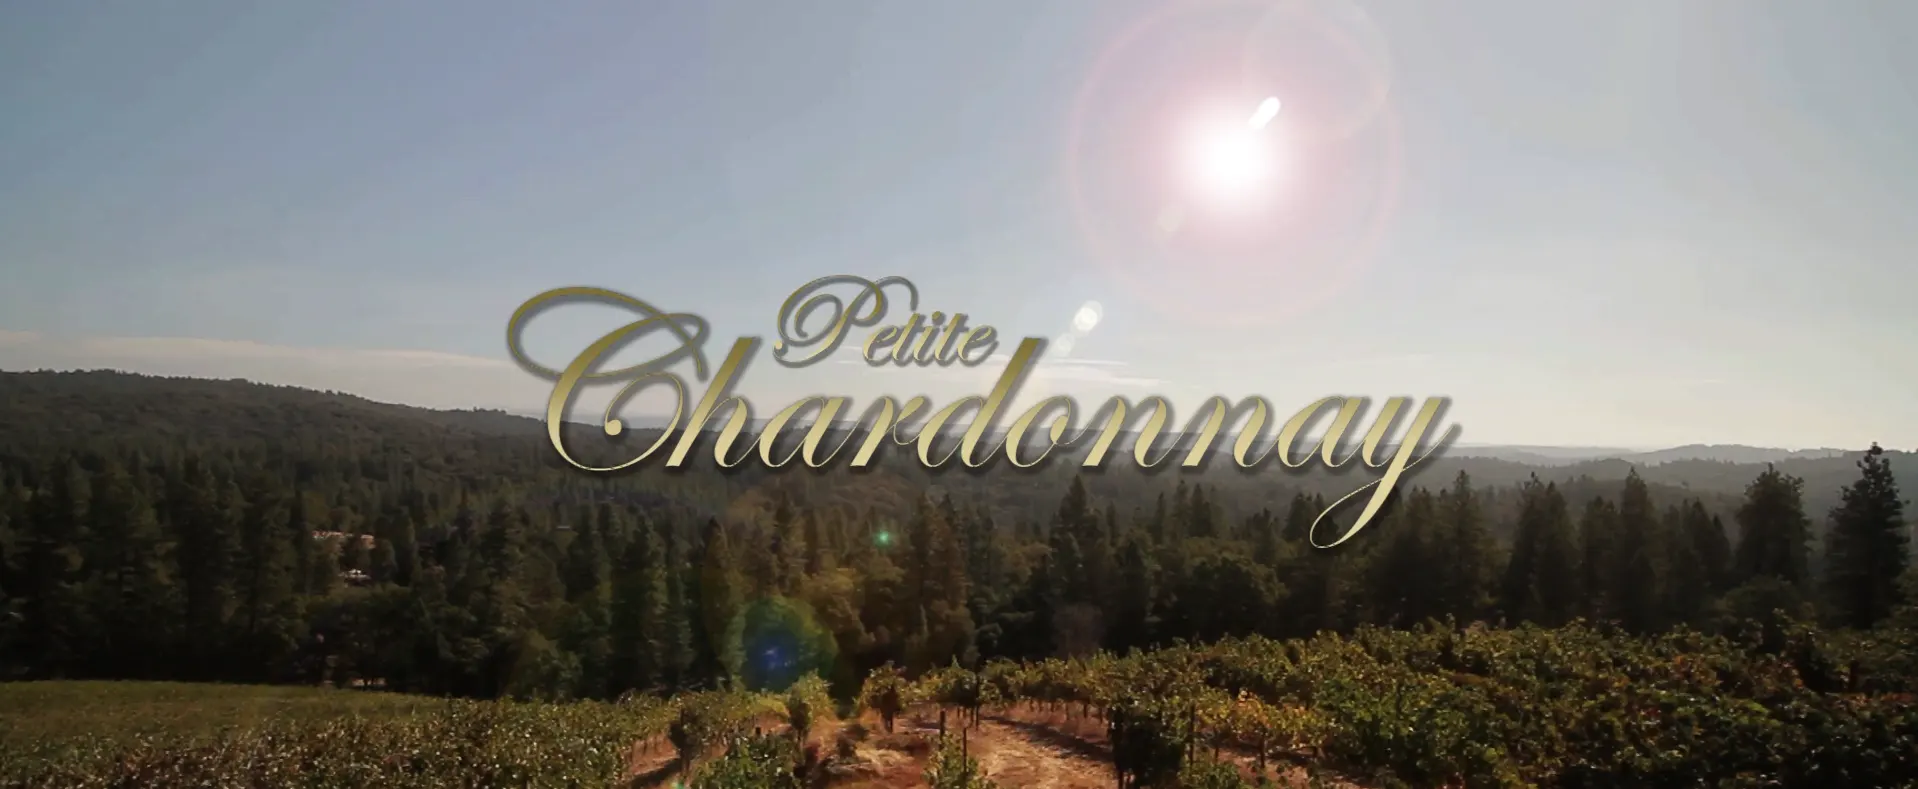 Petite Chardonnay by Gerald Marint Davenport & Aria Pictures